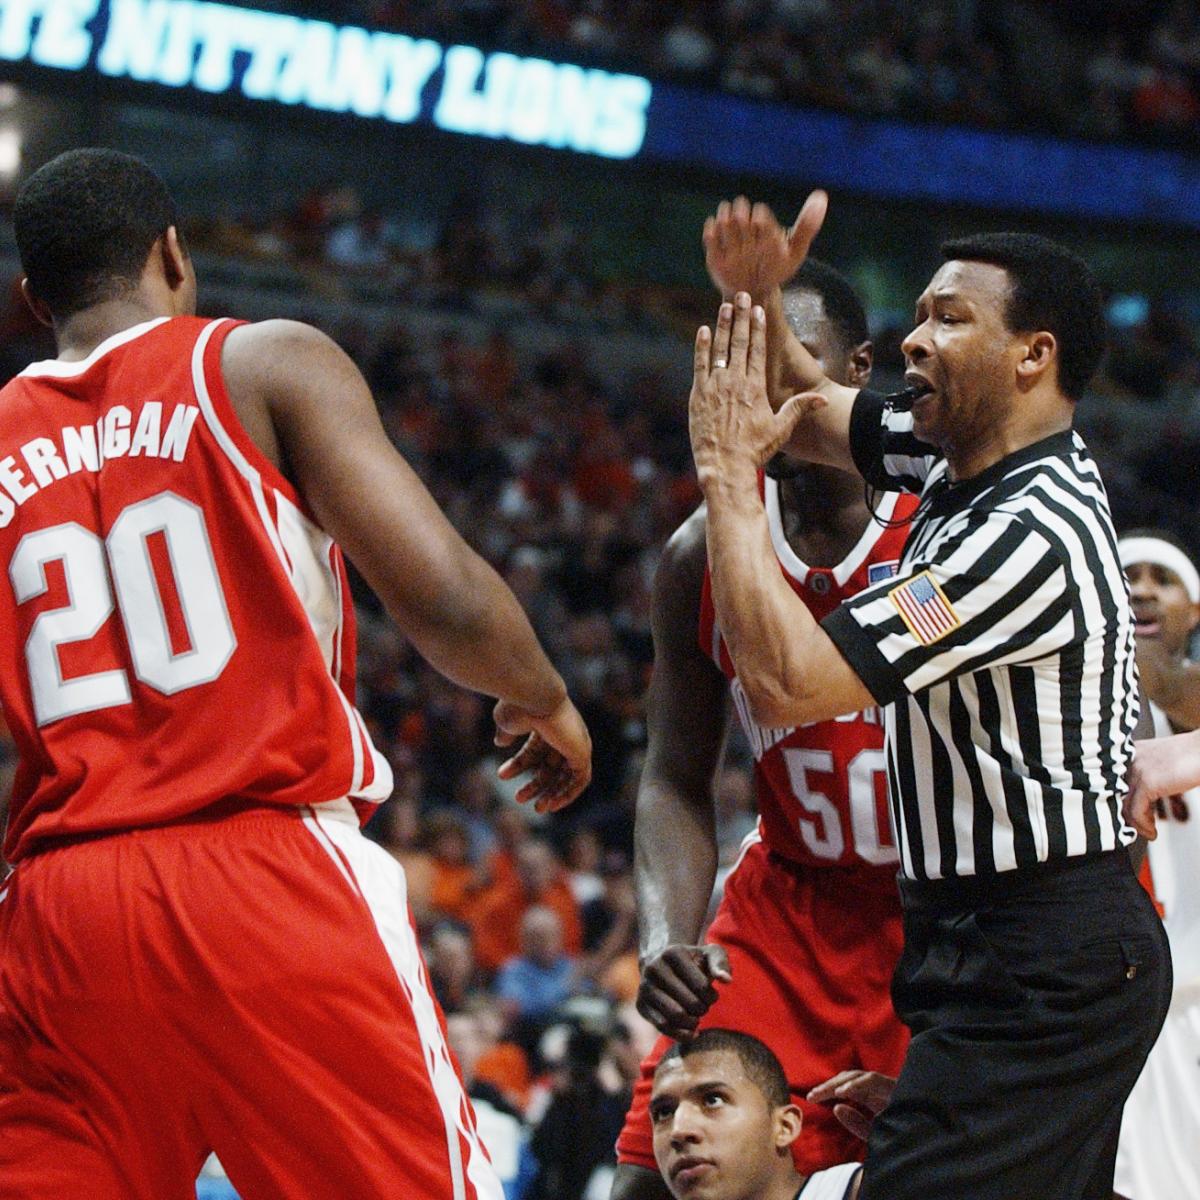 NCAA Basketball Referees Instructed to Call More Unsporting Technical